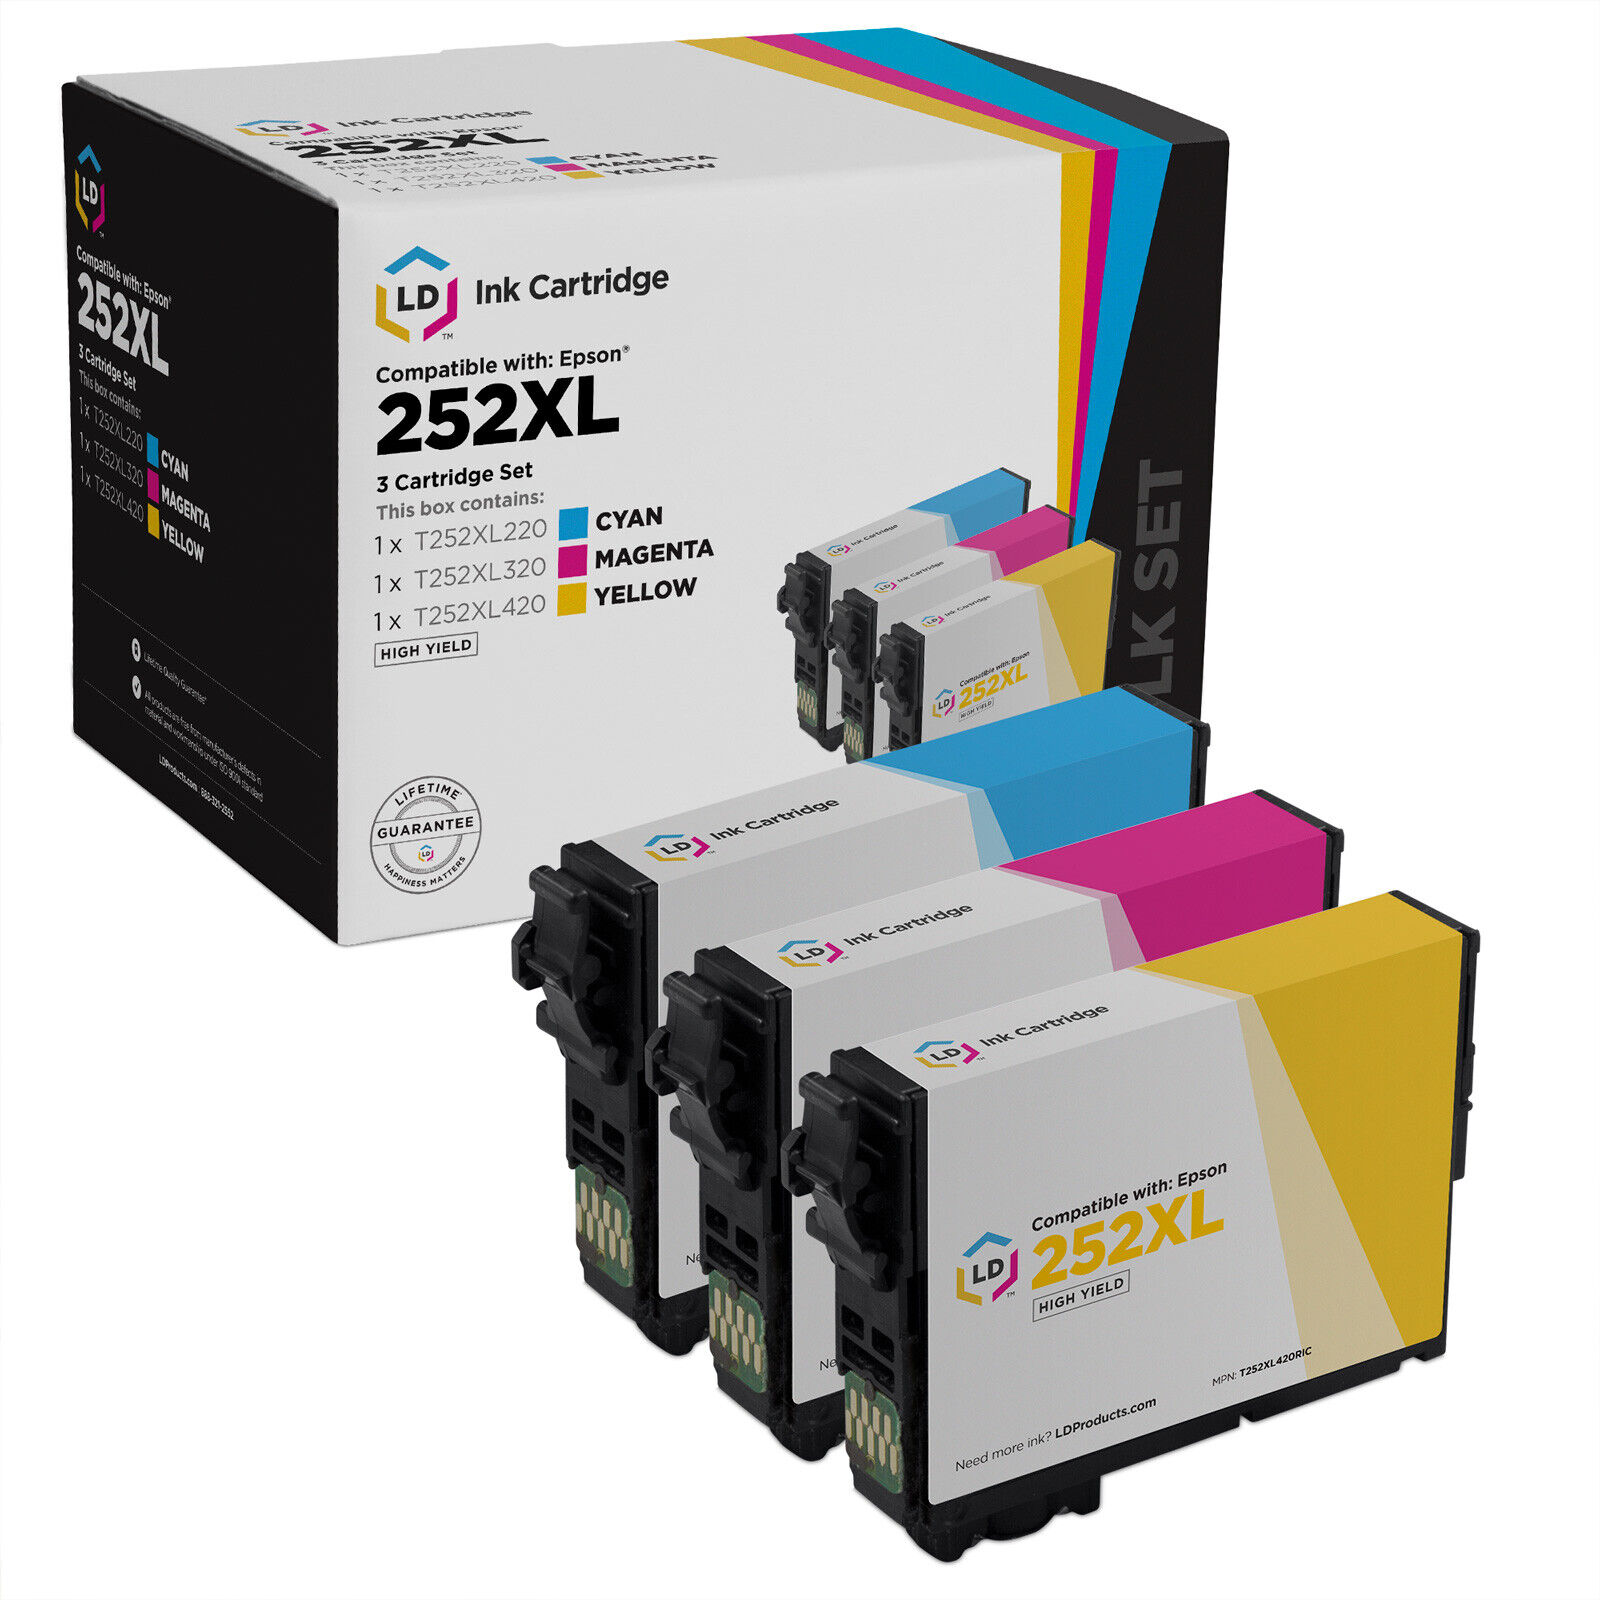 LD Products Epson 252XL HY Ink Cartridge Replacements Cyan, Magenta, Yellow, 3pk